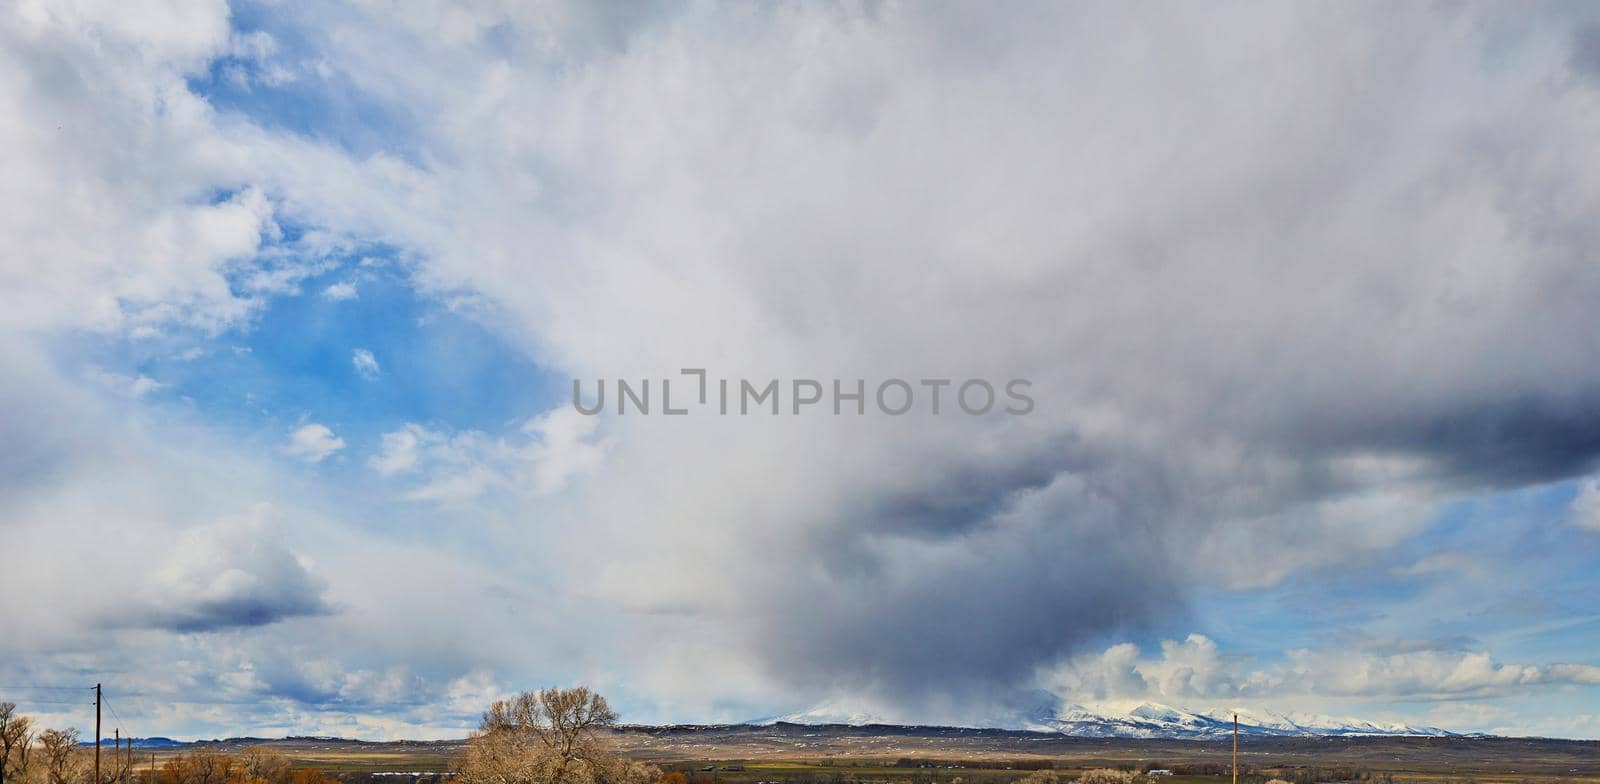 Image of Panorama of large storm overtaking snowy mountains